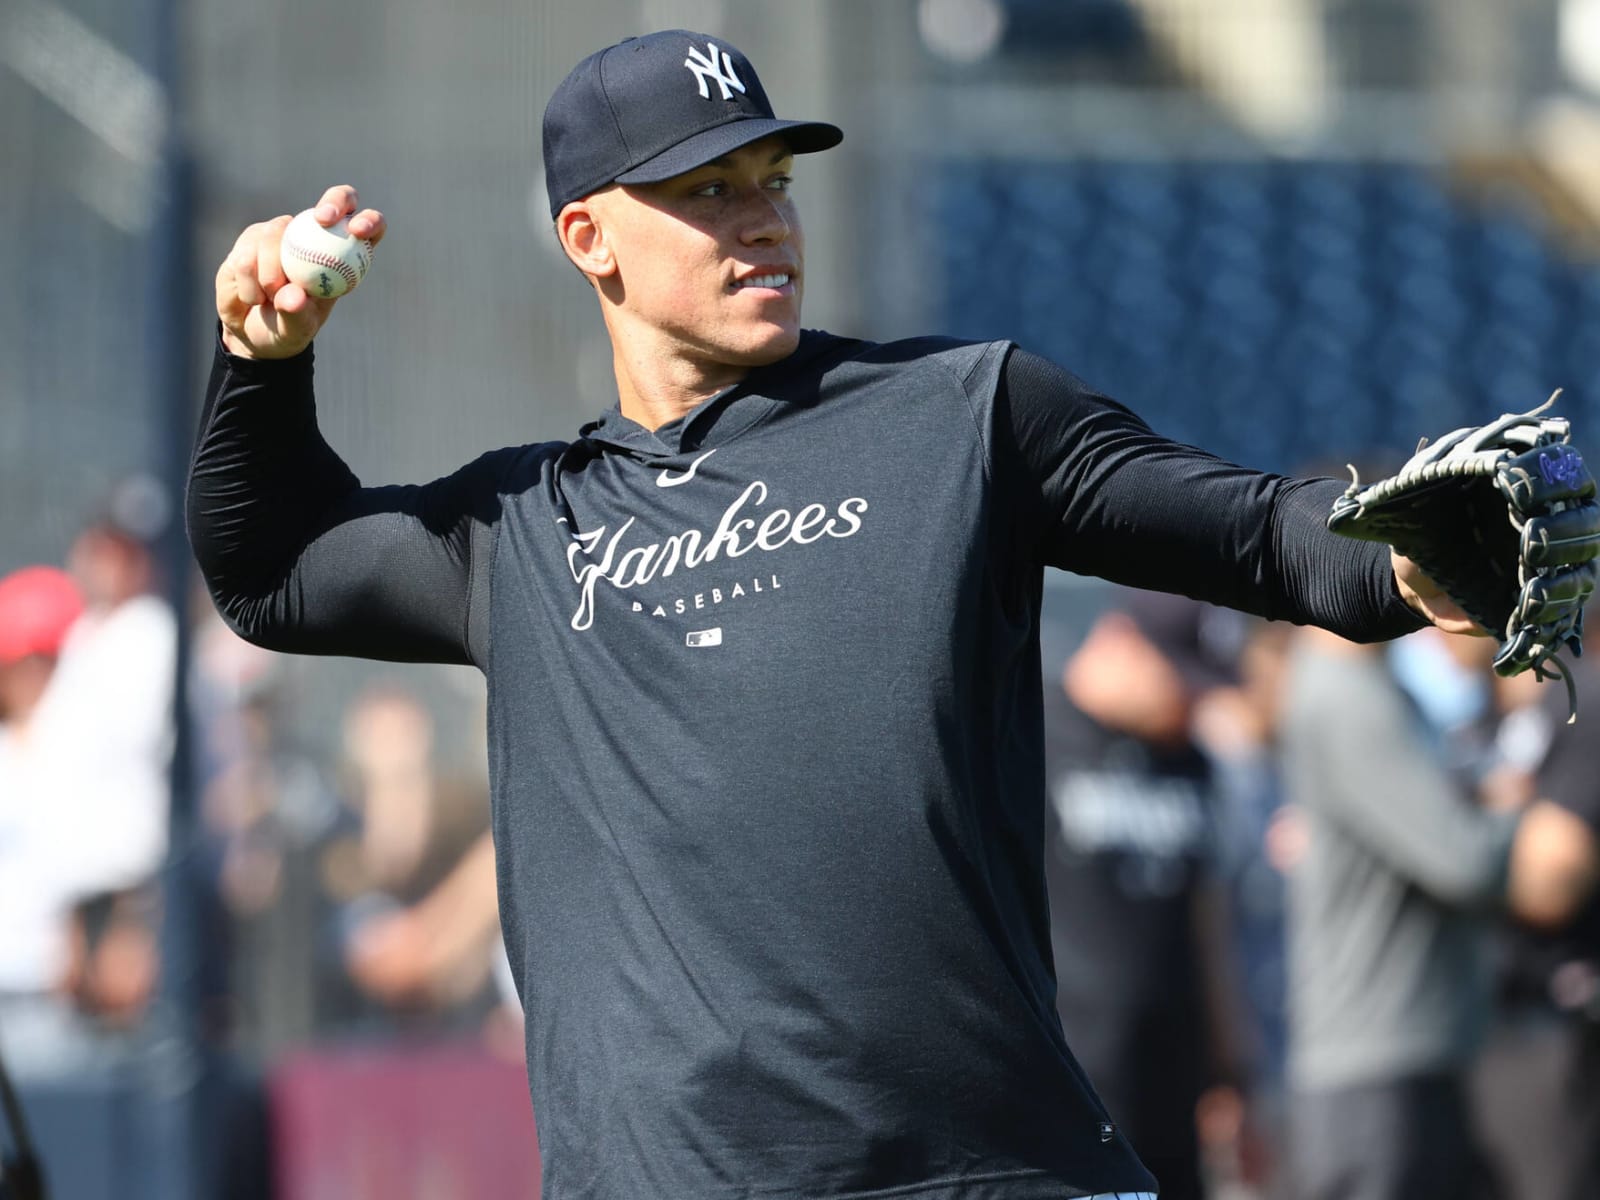 Insider explains why Mets didn't pursue Aaron Judge